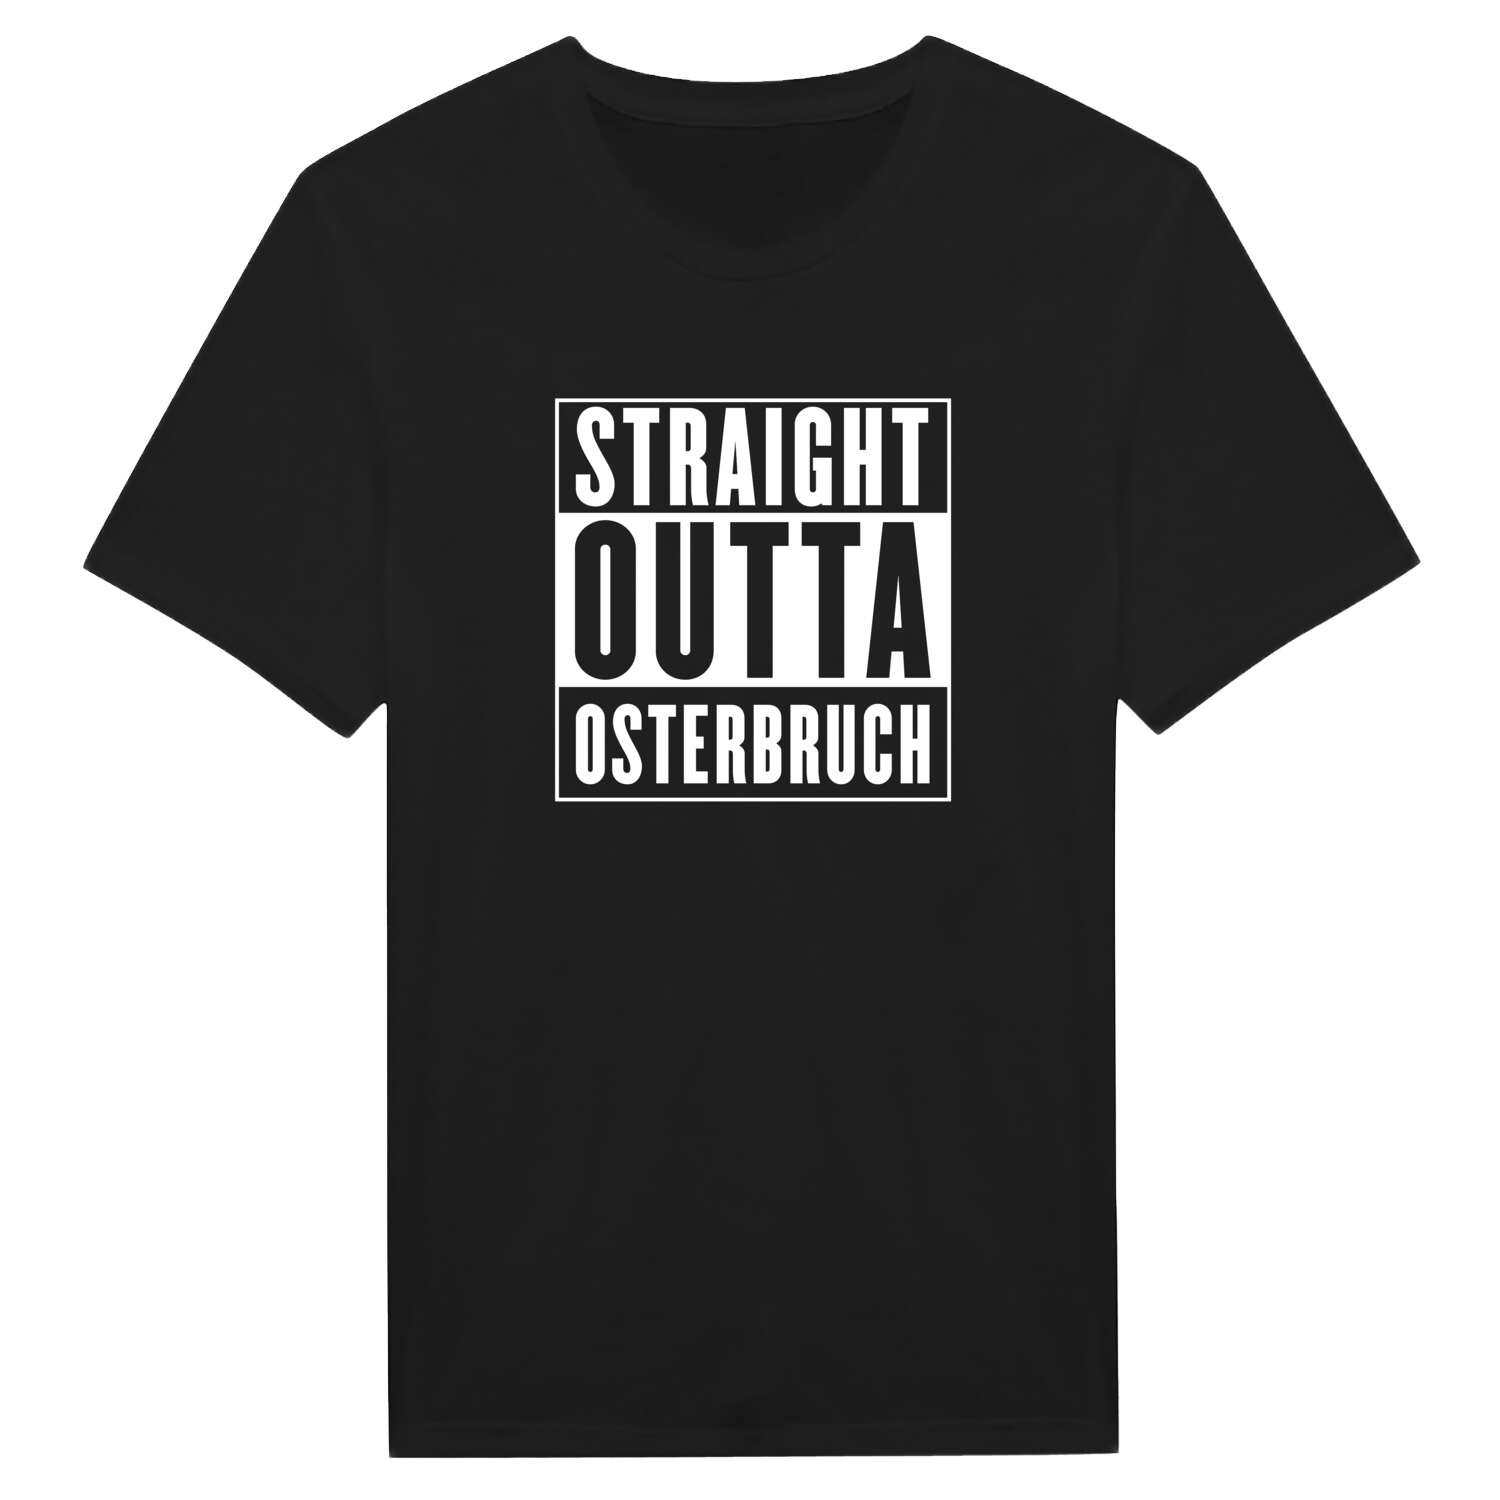 Osterbruch T-Shirt »Straight Outta«